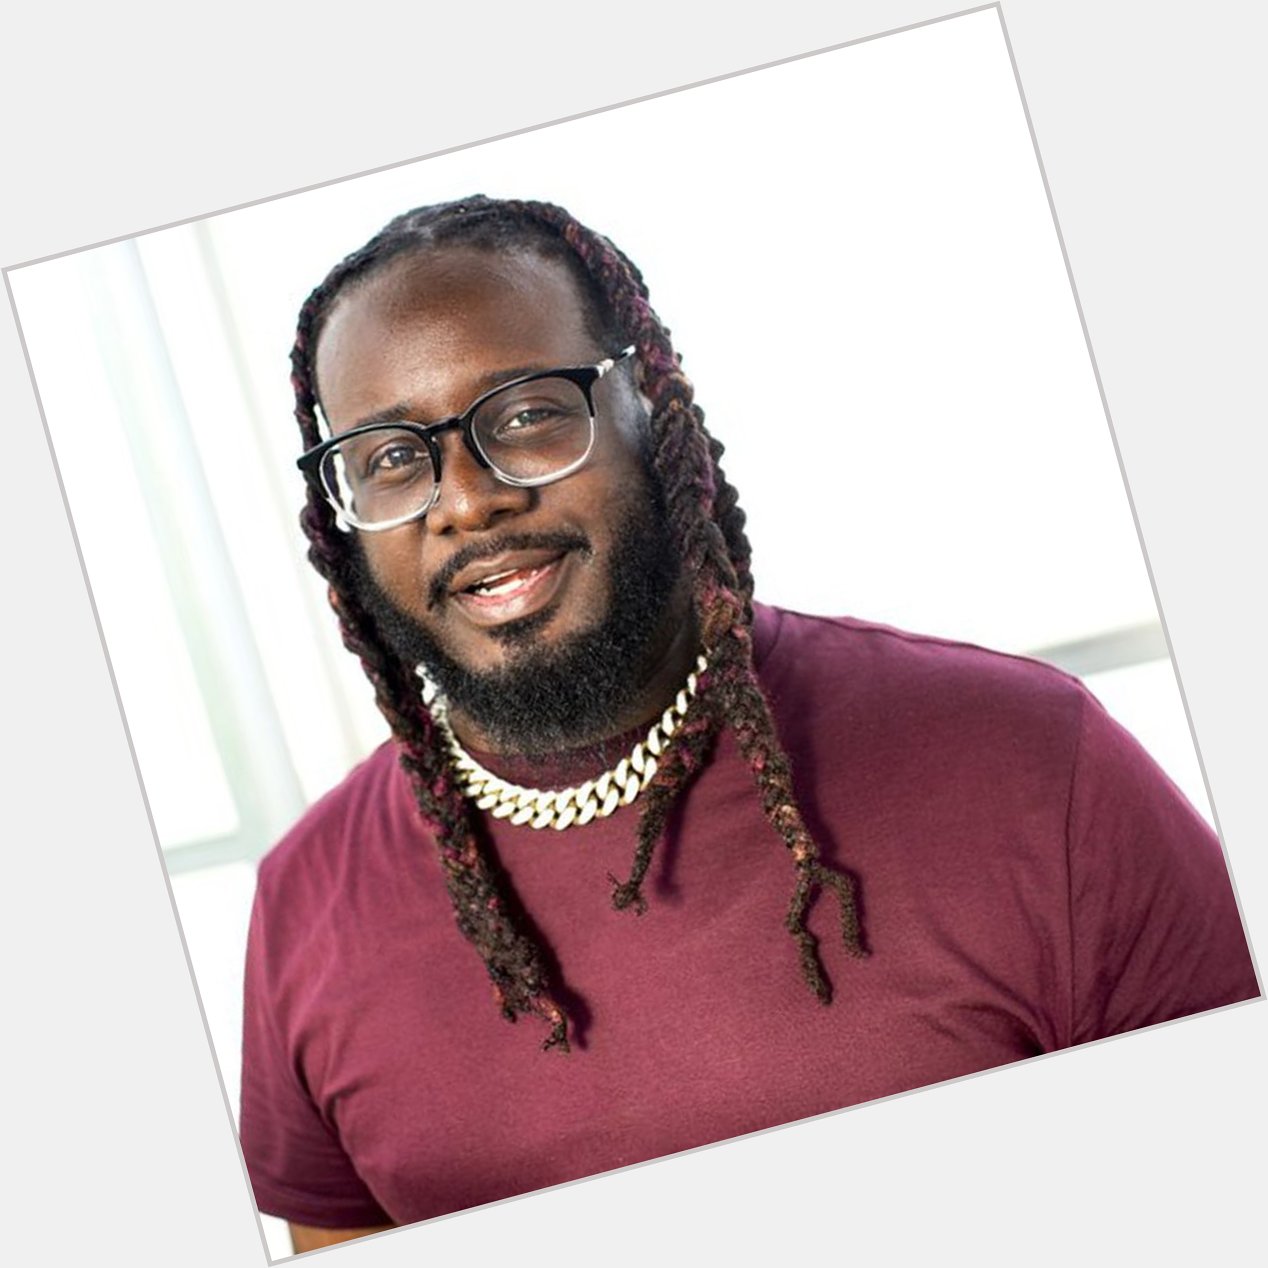 Happy 37th Birthday, T-Pain

What s your favorite song from him? 